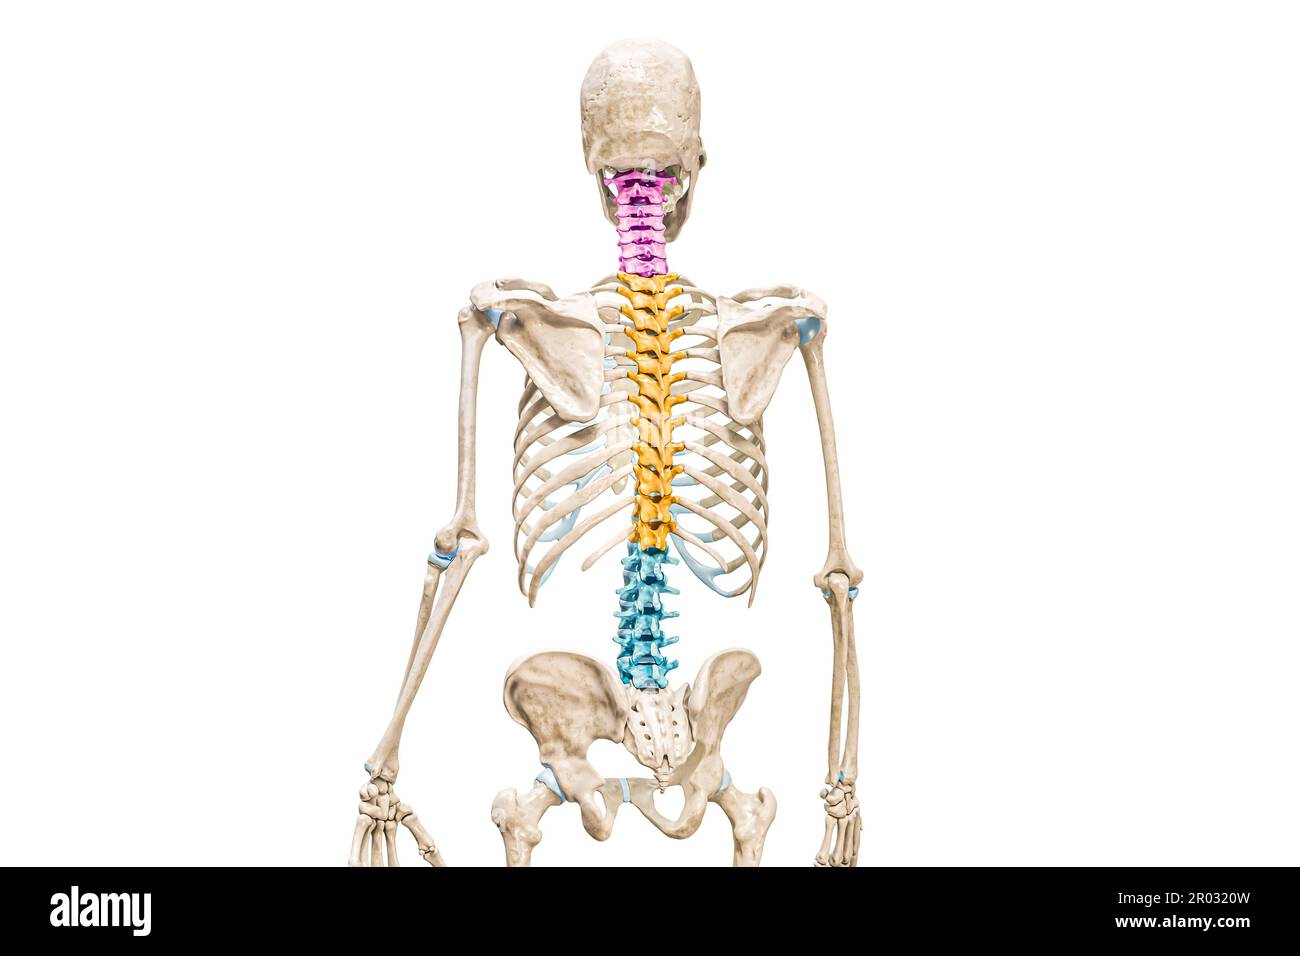 Cervical, thoracic and lumbar vertebrae in color back view 3D rendering illustration isolated on white background. Human spine or backbone anatomy, me Stock Photo